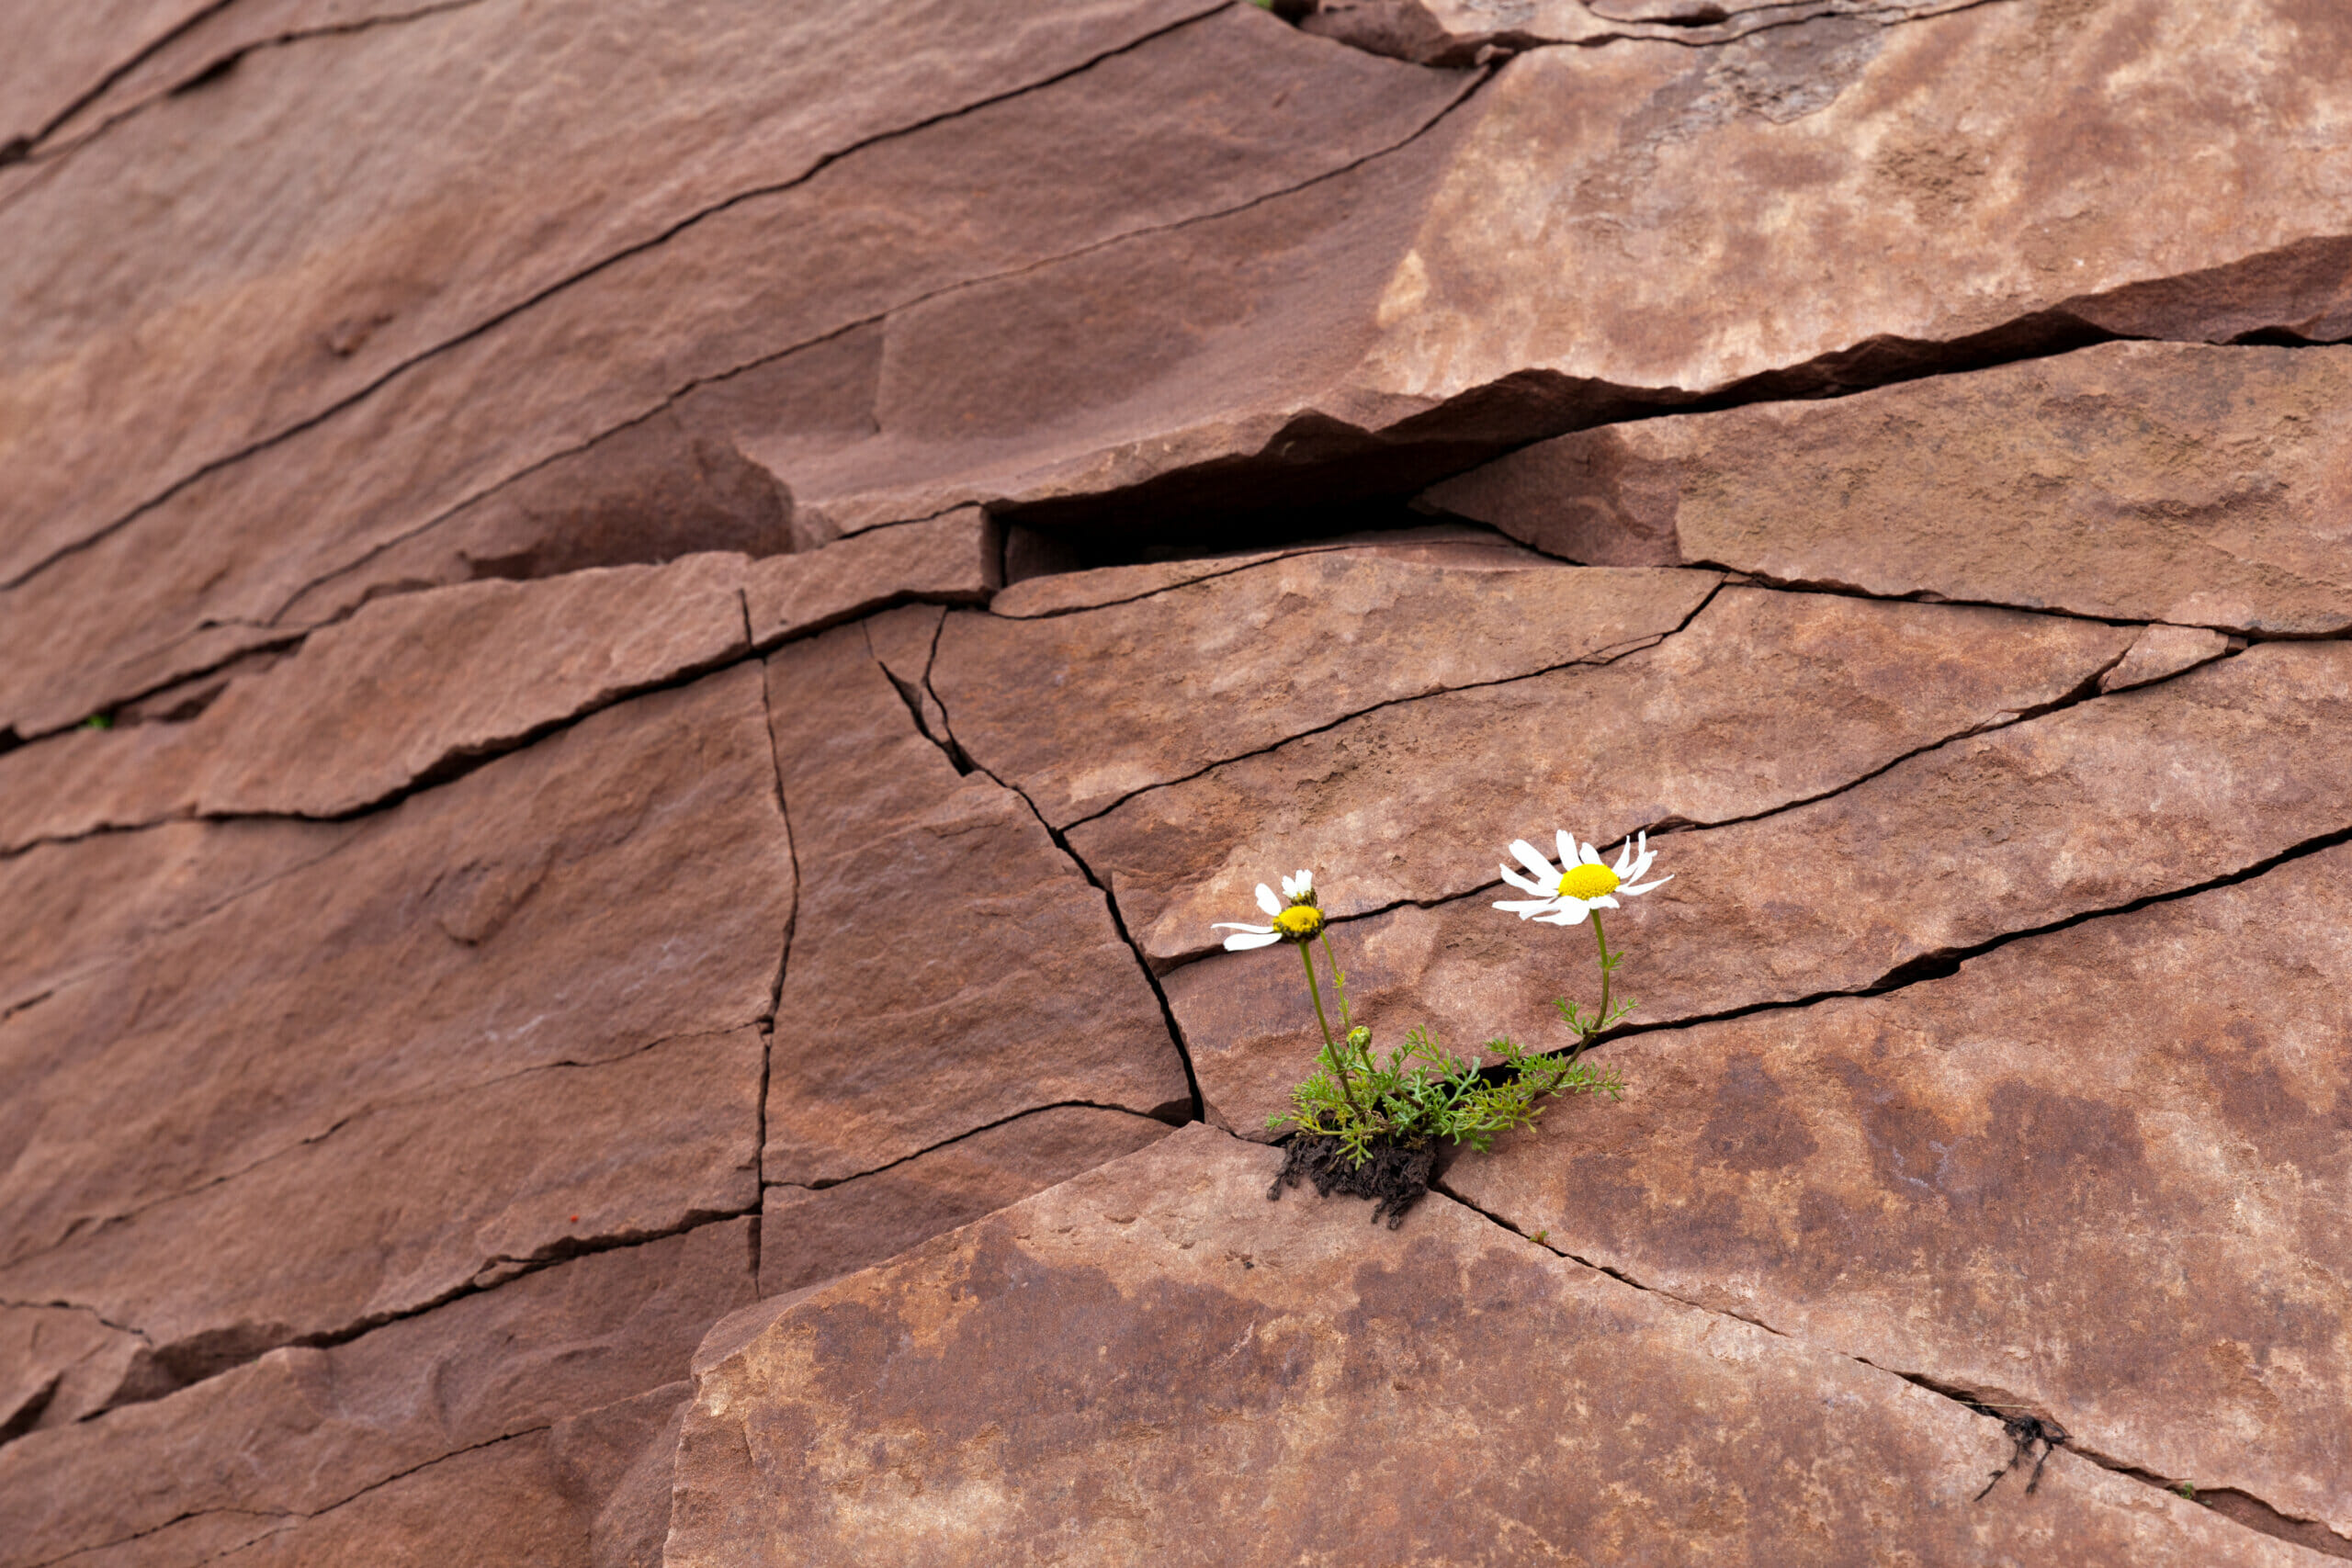 Arctic dwarf daisies grew in a crack in the rock